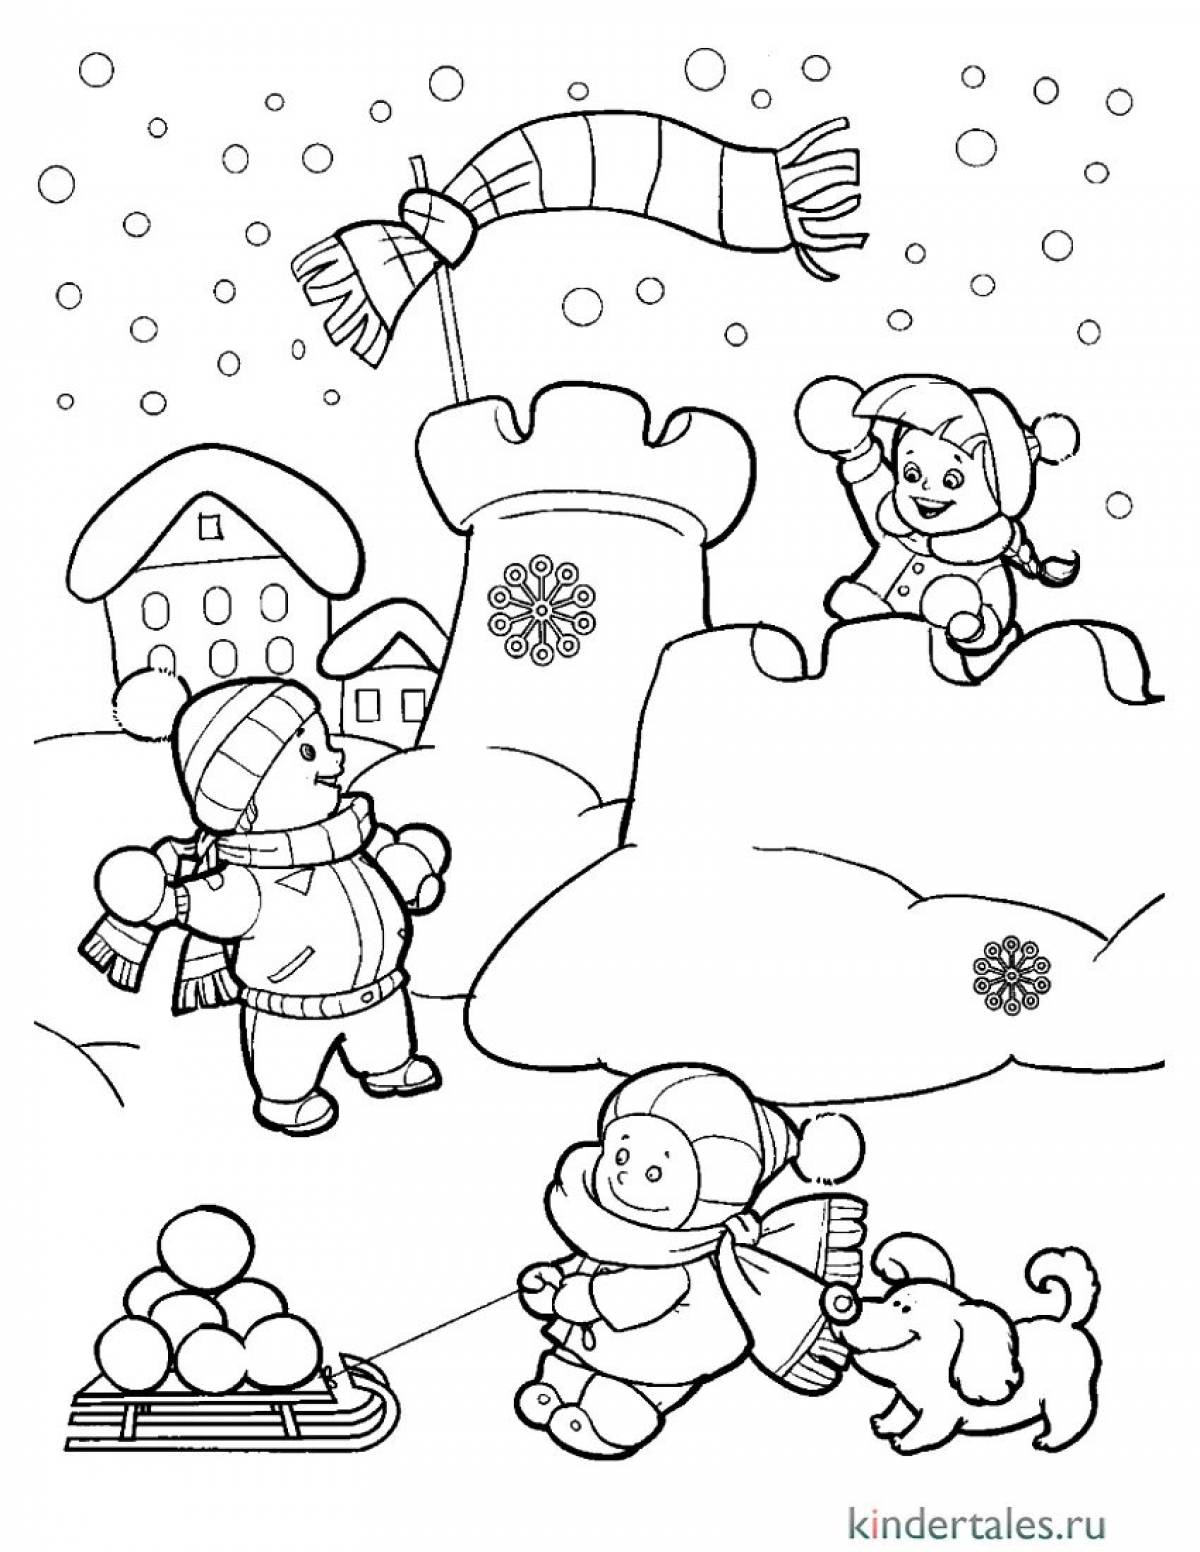 Winter games for kids #9